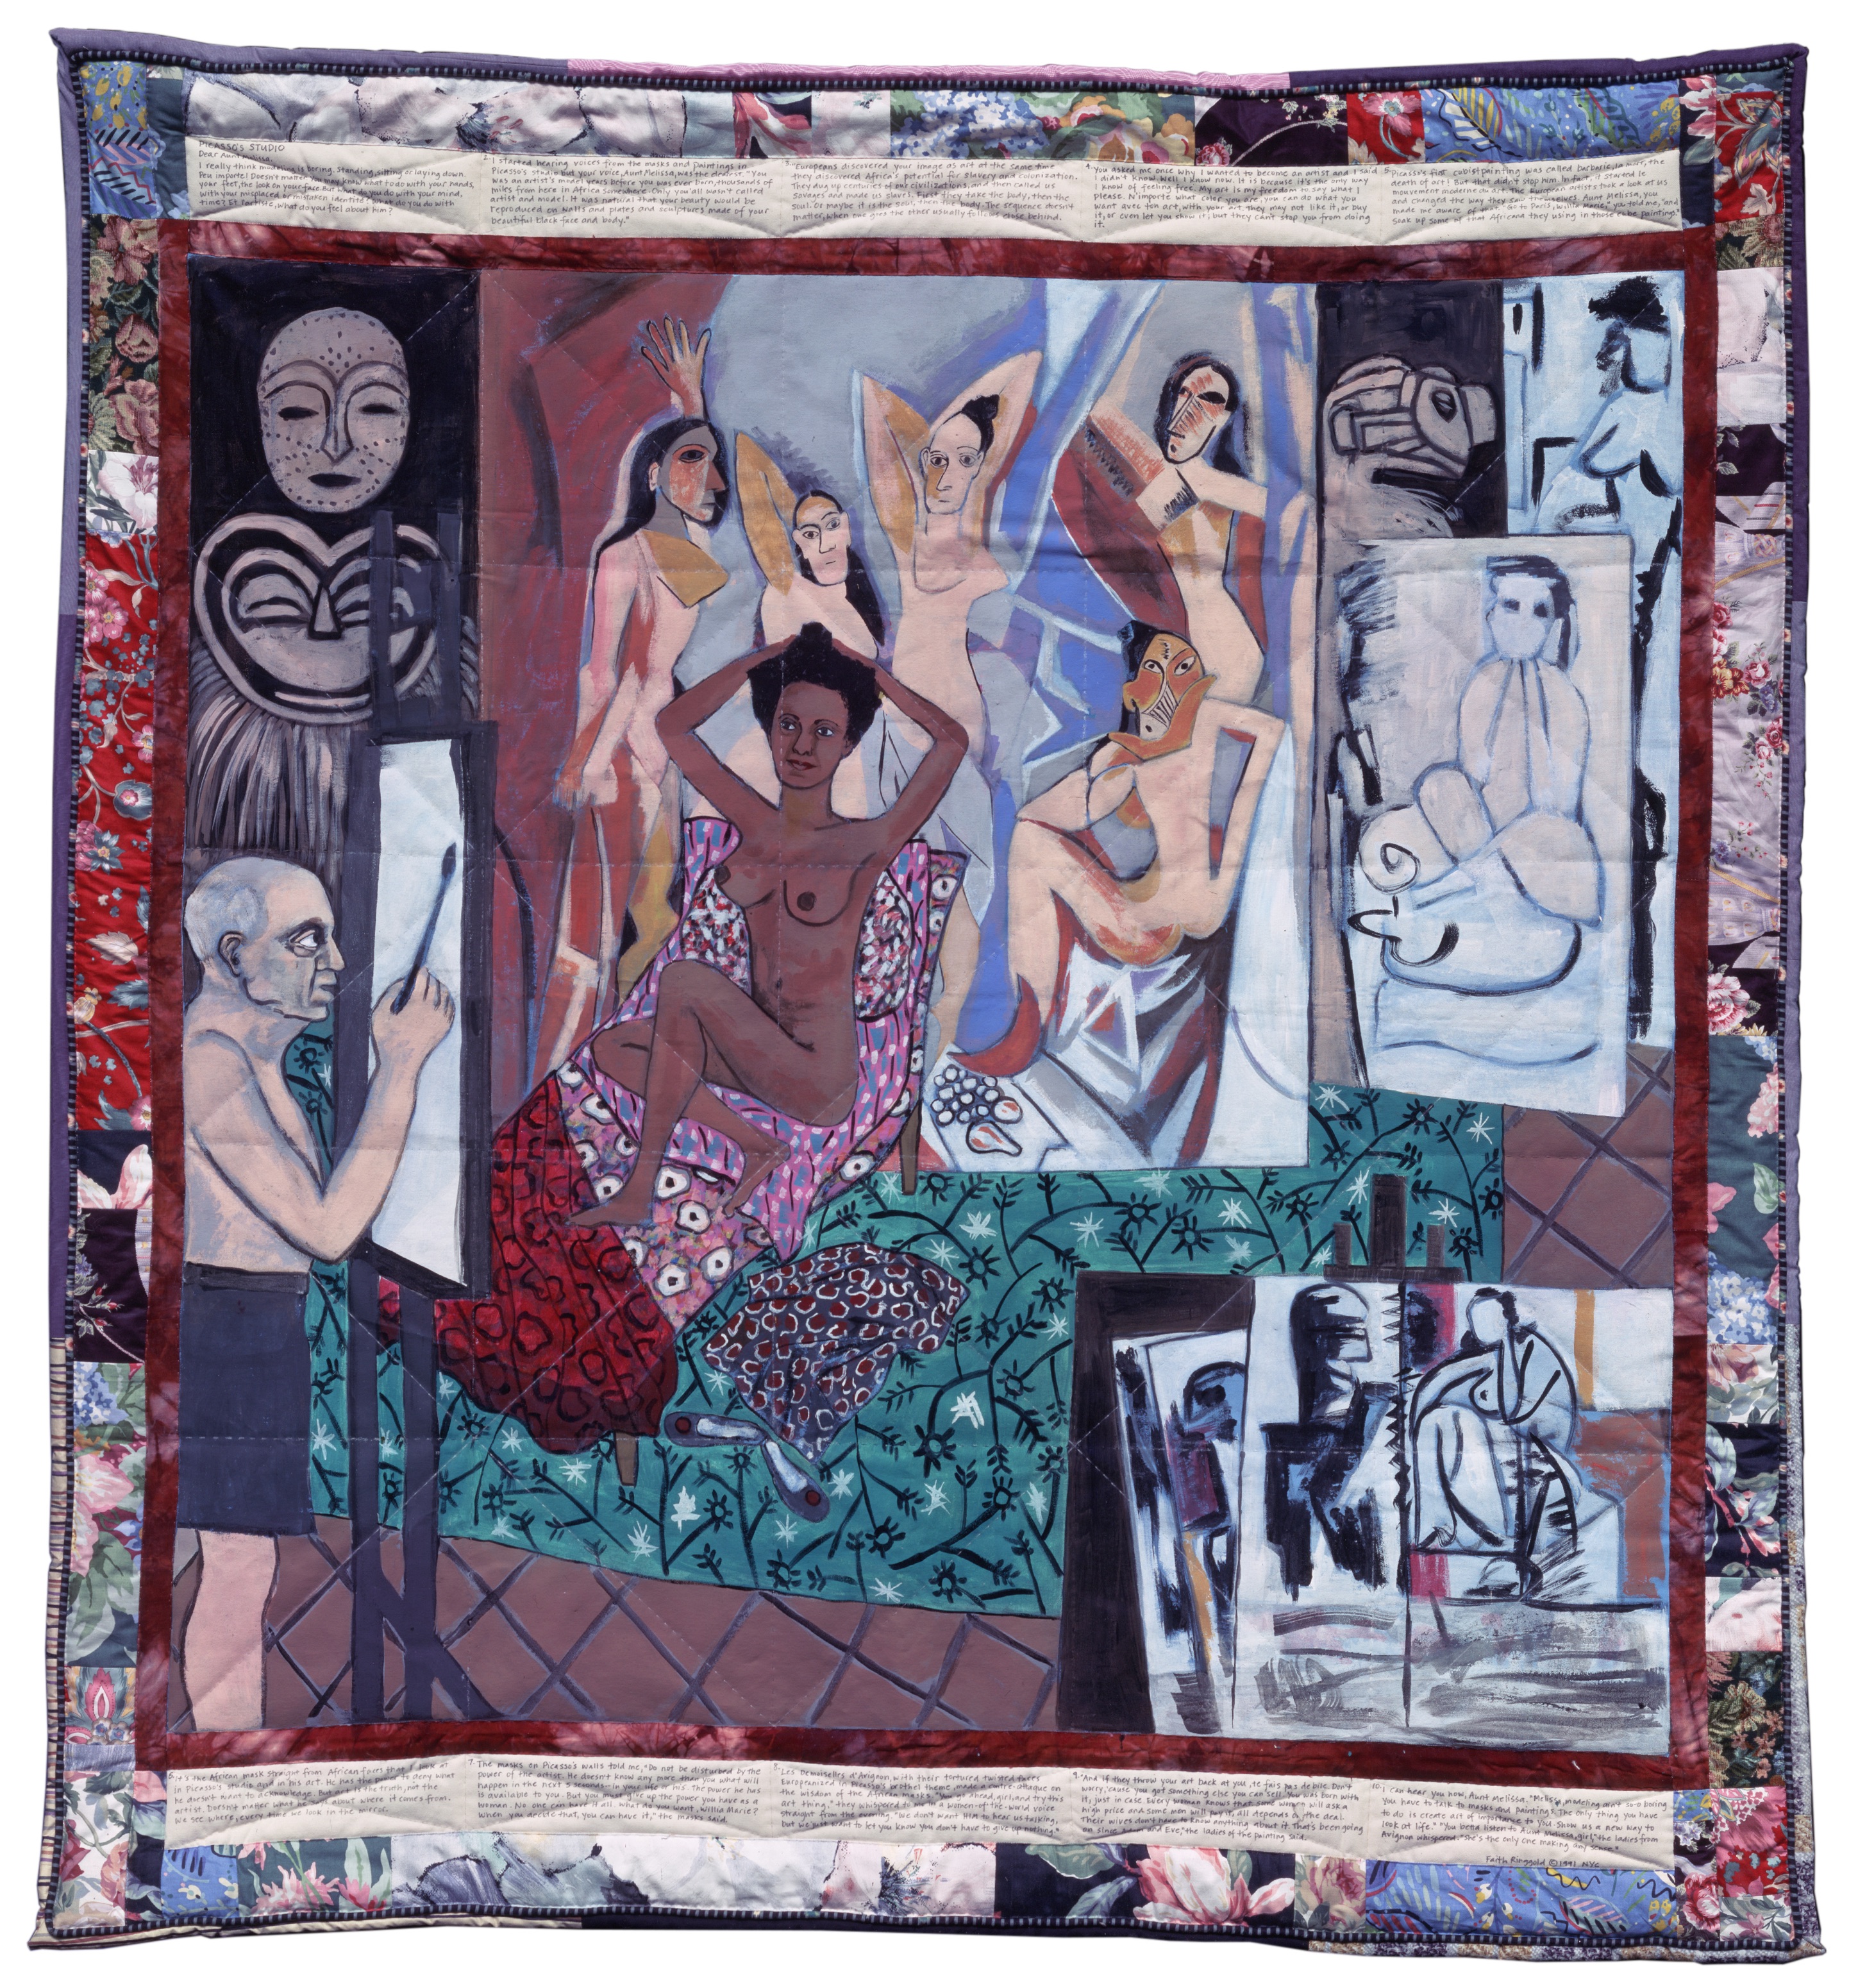 Faith Ringgold, Picasso’s Studio: The French Collection Part I, #7, 1991, Acrylique sur toile, tissus imprimé et teint, encre, 185,4 x 172,7 cm, © Faith Ringgold / ARS, NY and DACS, London, courtesy ACA Galleries.